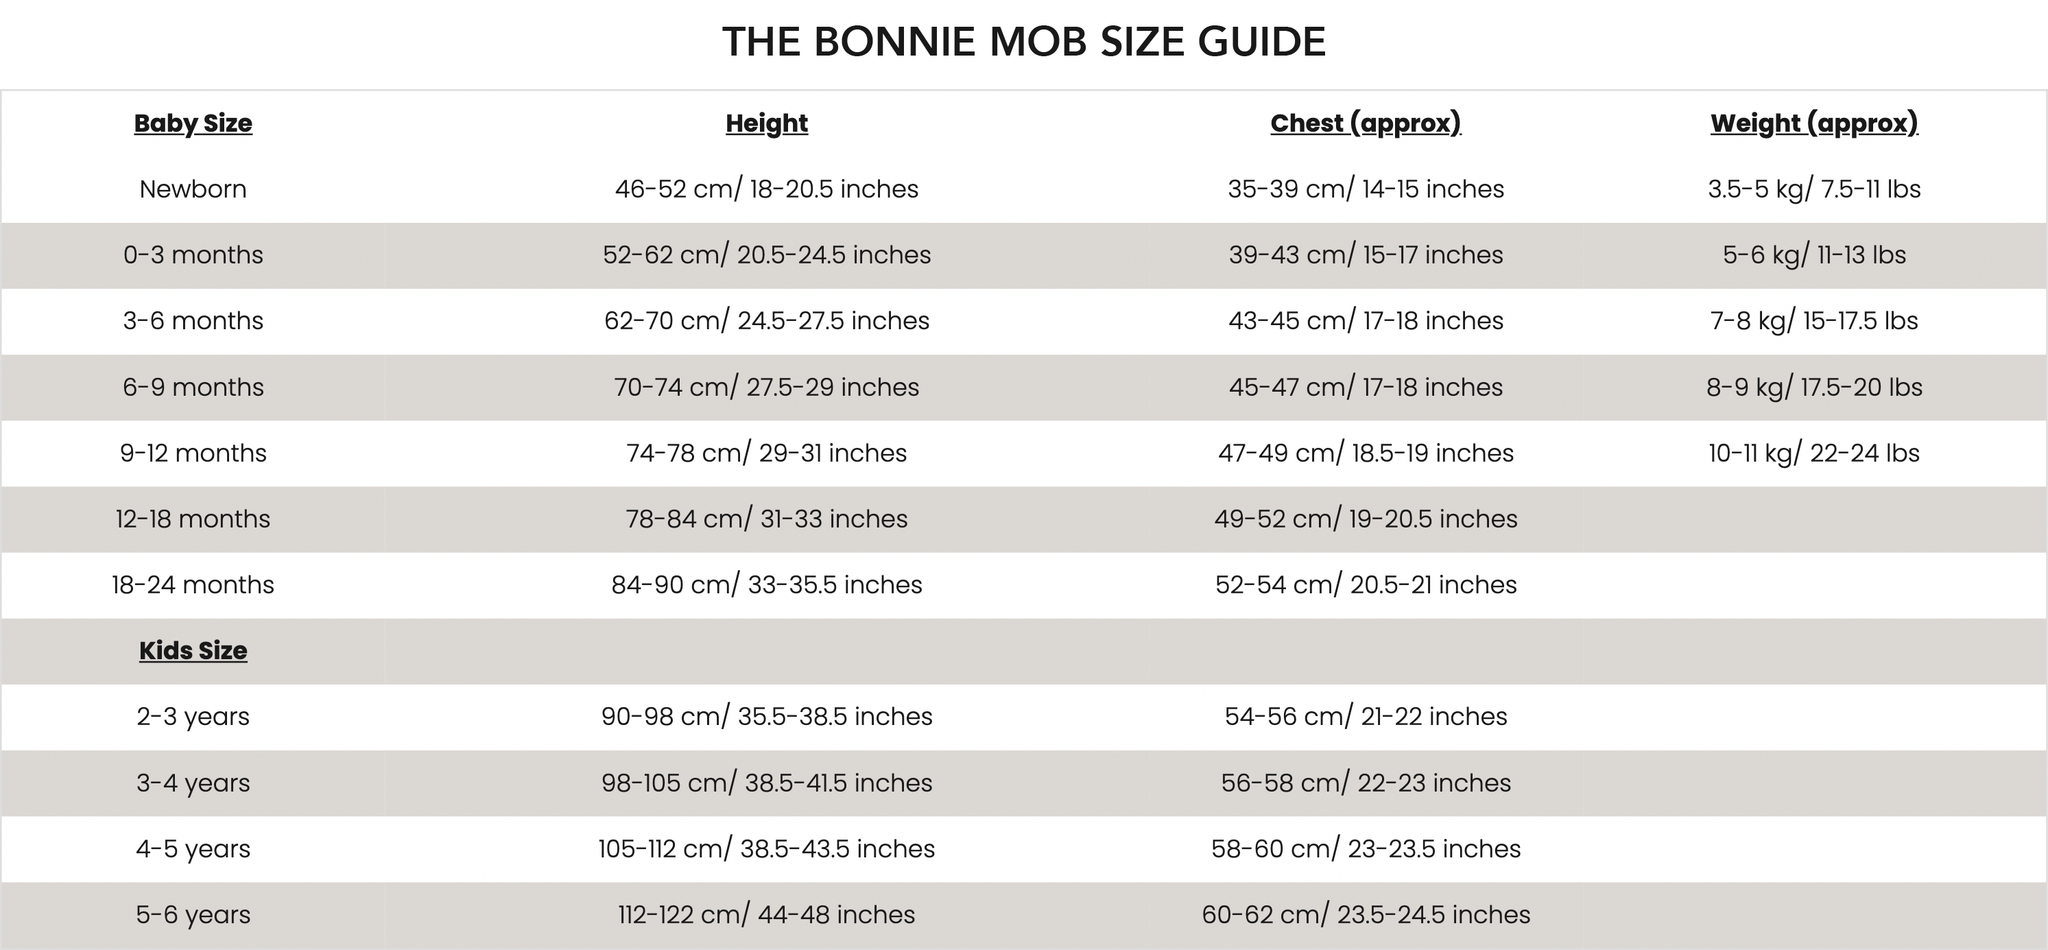 The Bonnie Mob size guide